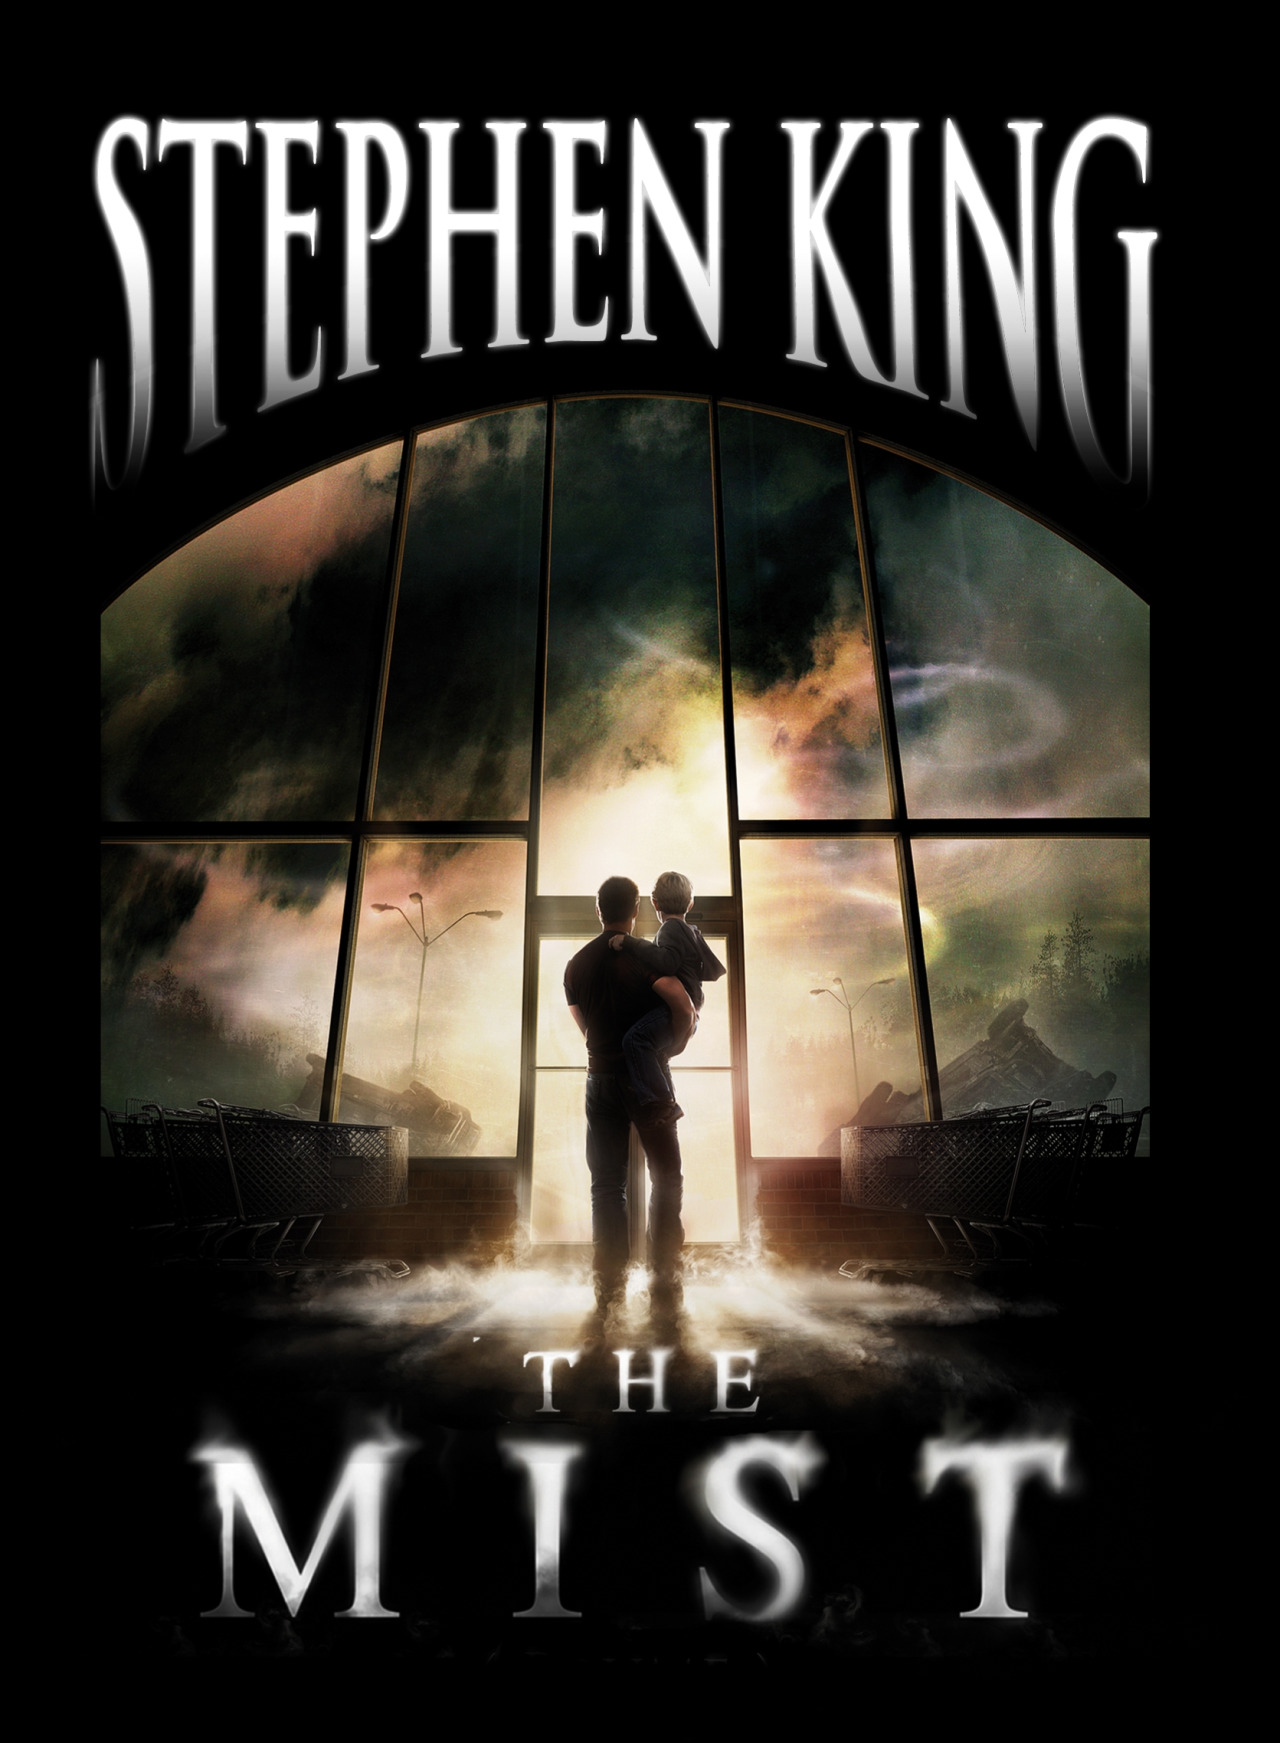 Stephen King's 'The Mist' Series Will Be On Spike in 2017 ...